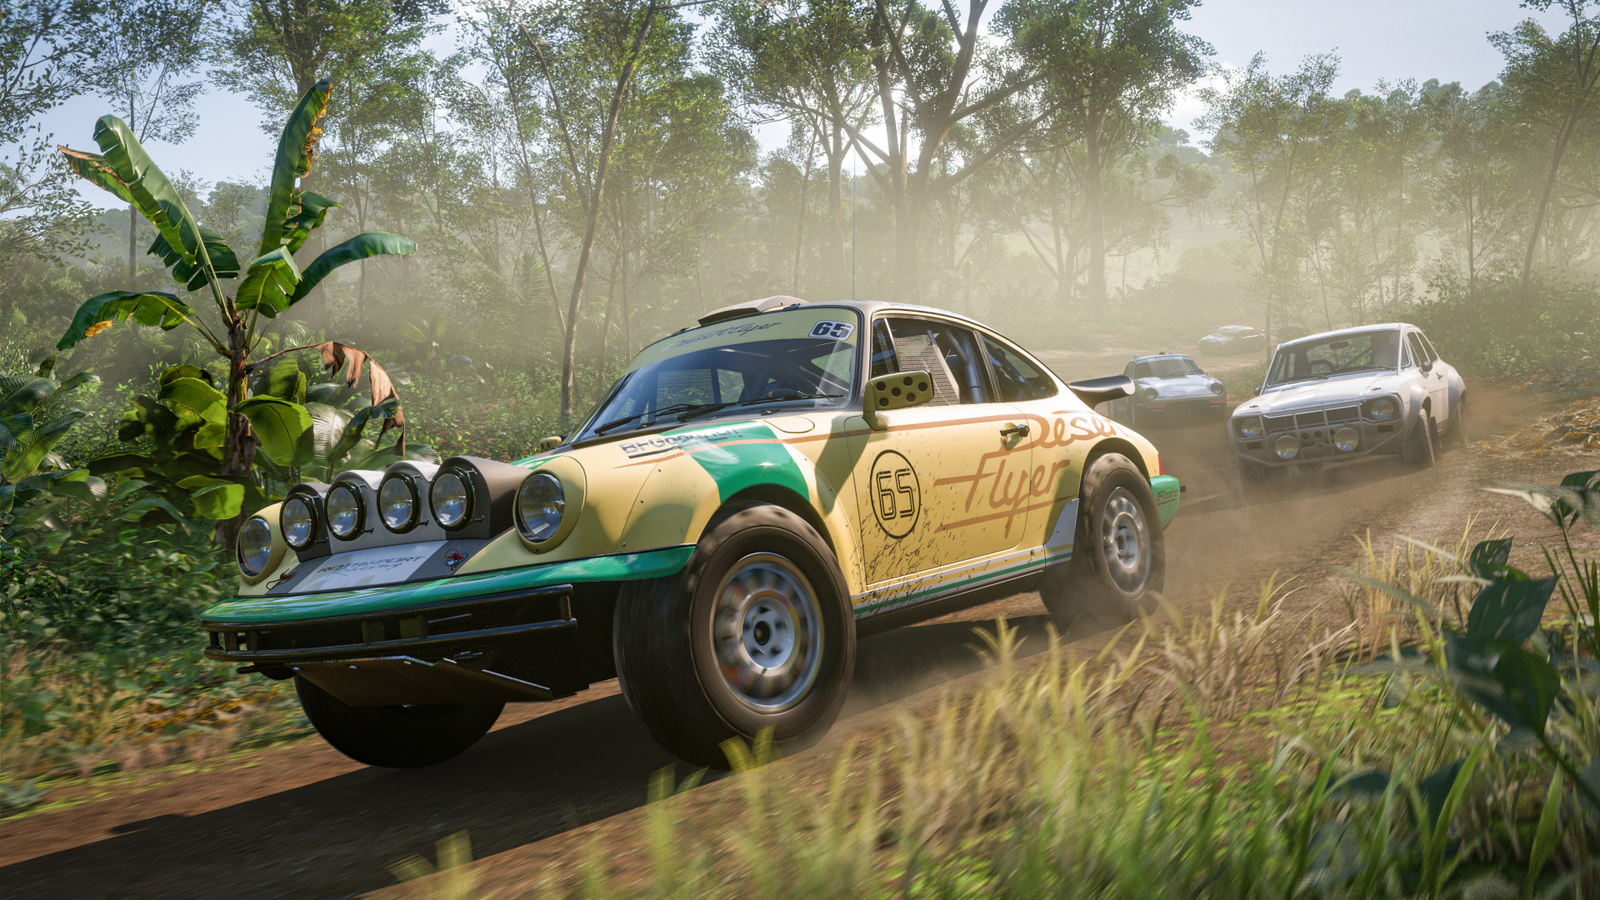 Forza Horizon 5 Hot Wheels Expansion leaks on Steam